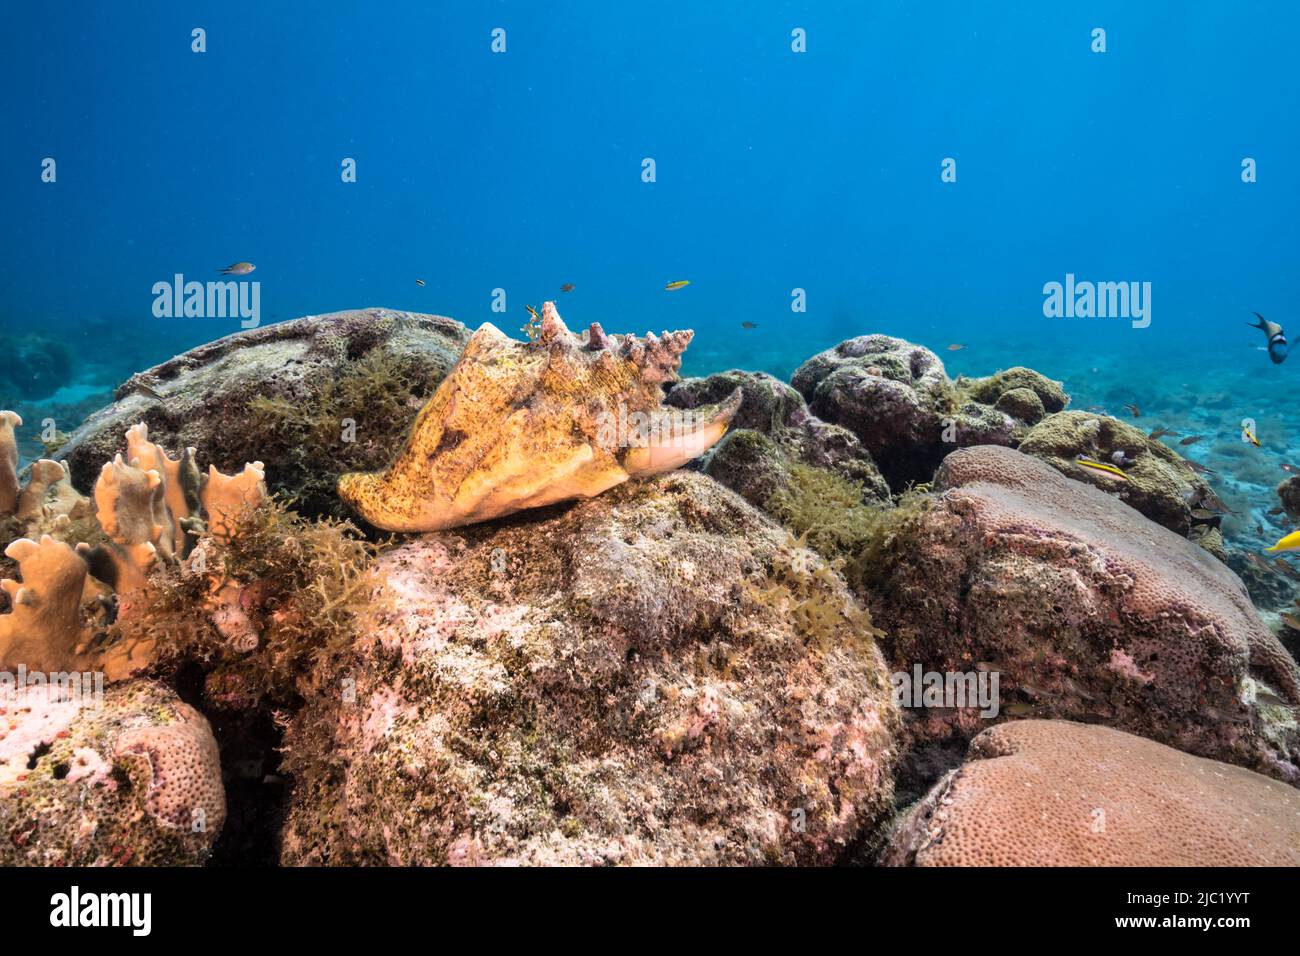 Seascape with Conch Shell, coral, and sponge in the coral reef of the Caribbean Sea, Curacao Stock Photo